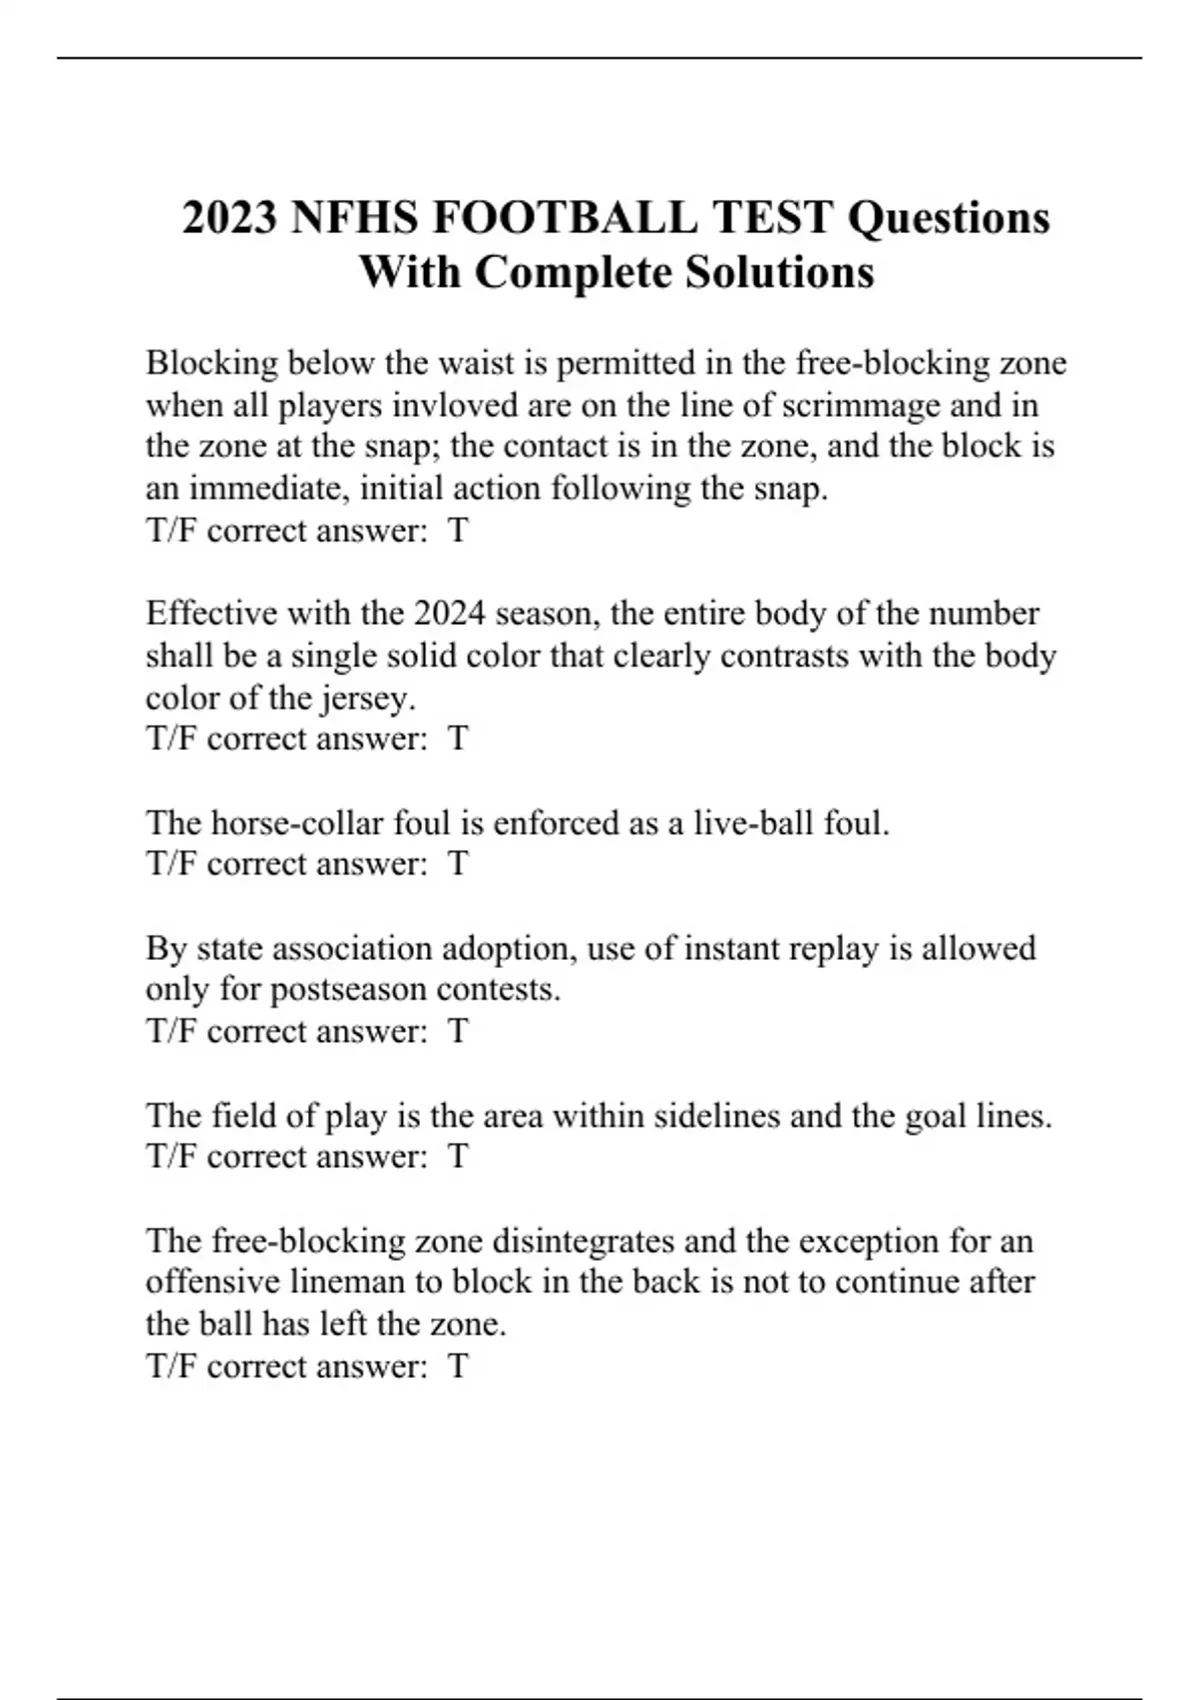 2023 NFHS FOOTBALL TEST Questions With Complete Solutions NFHS